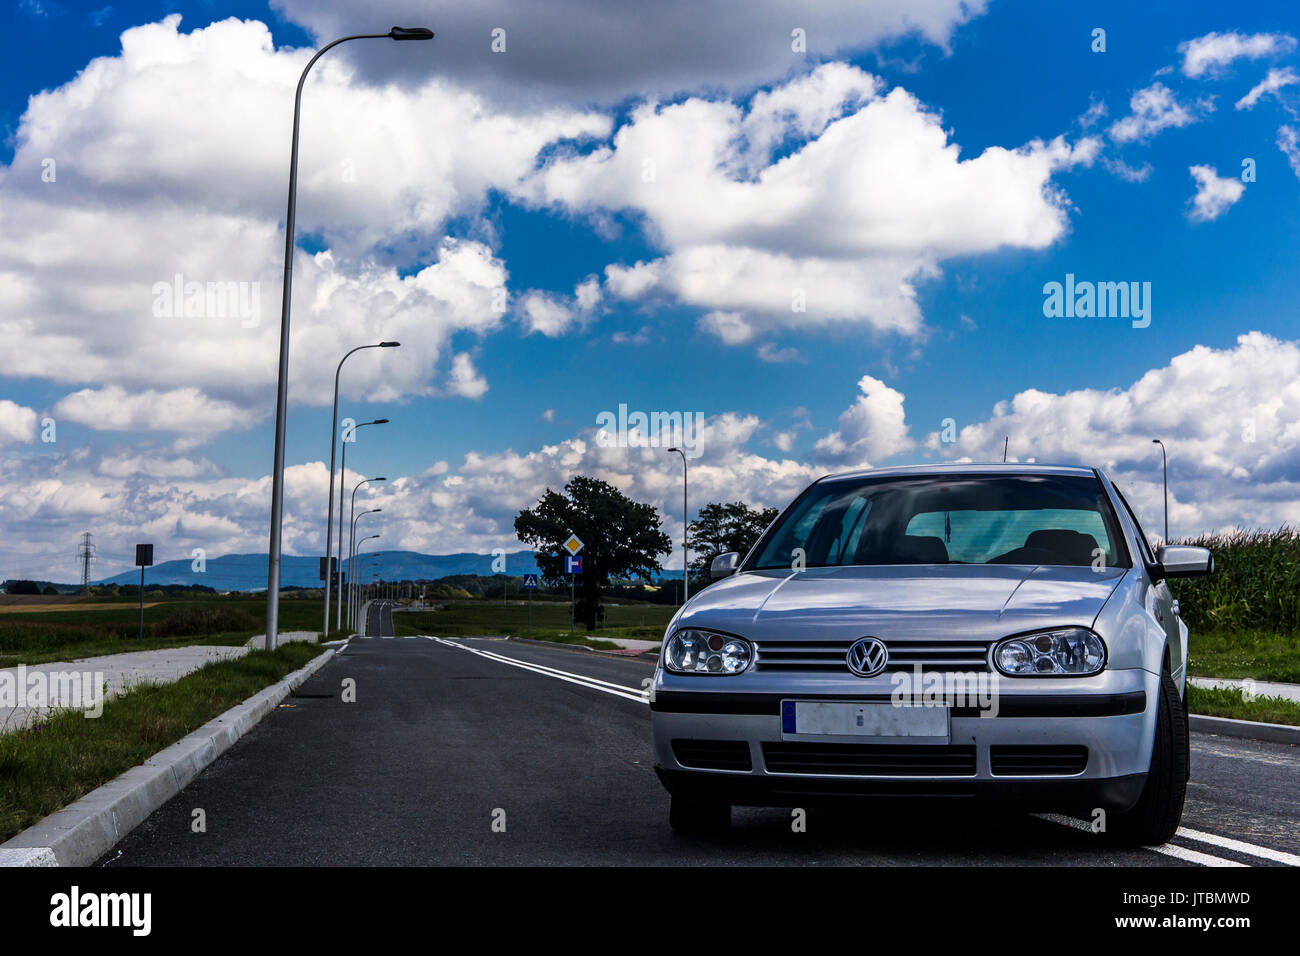 Front of a silver Volkswagen Golf IV parked on the street with beautiful blue cloudy sky in the background. Stock Photo